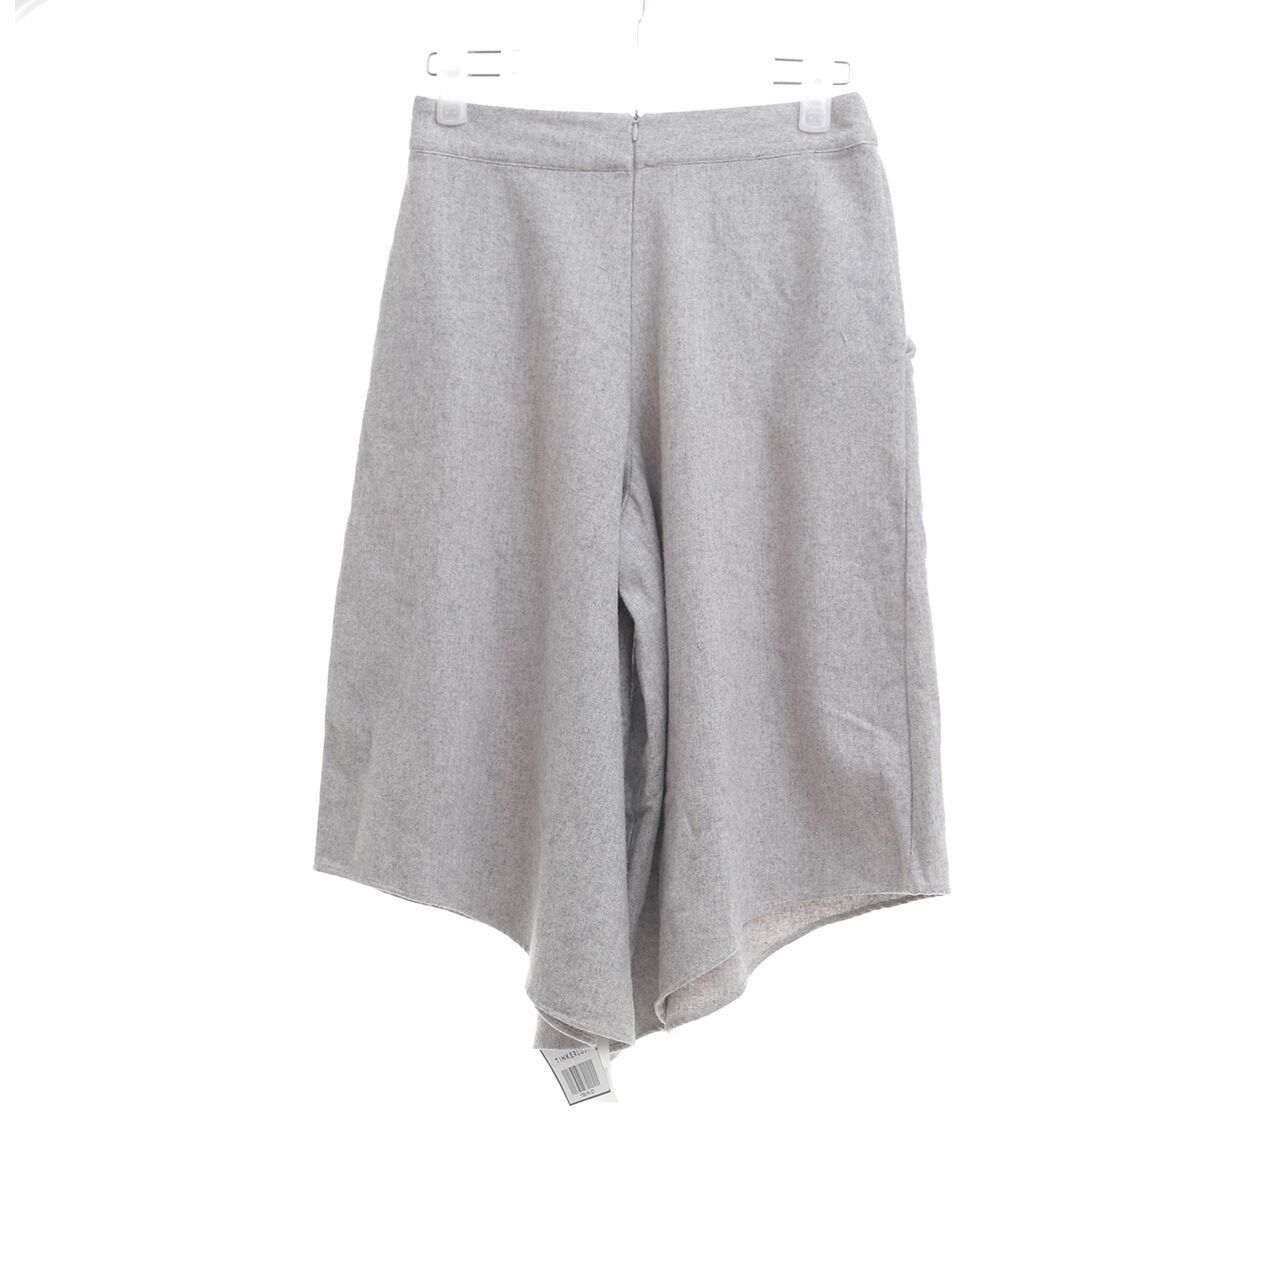 Apparel After Dark Grey Cropped Pants